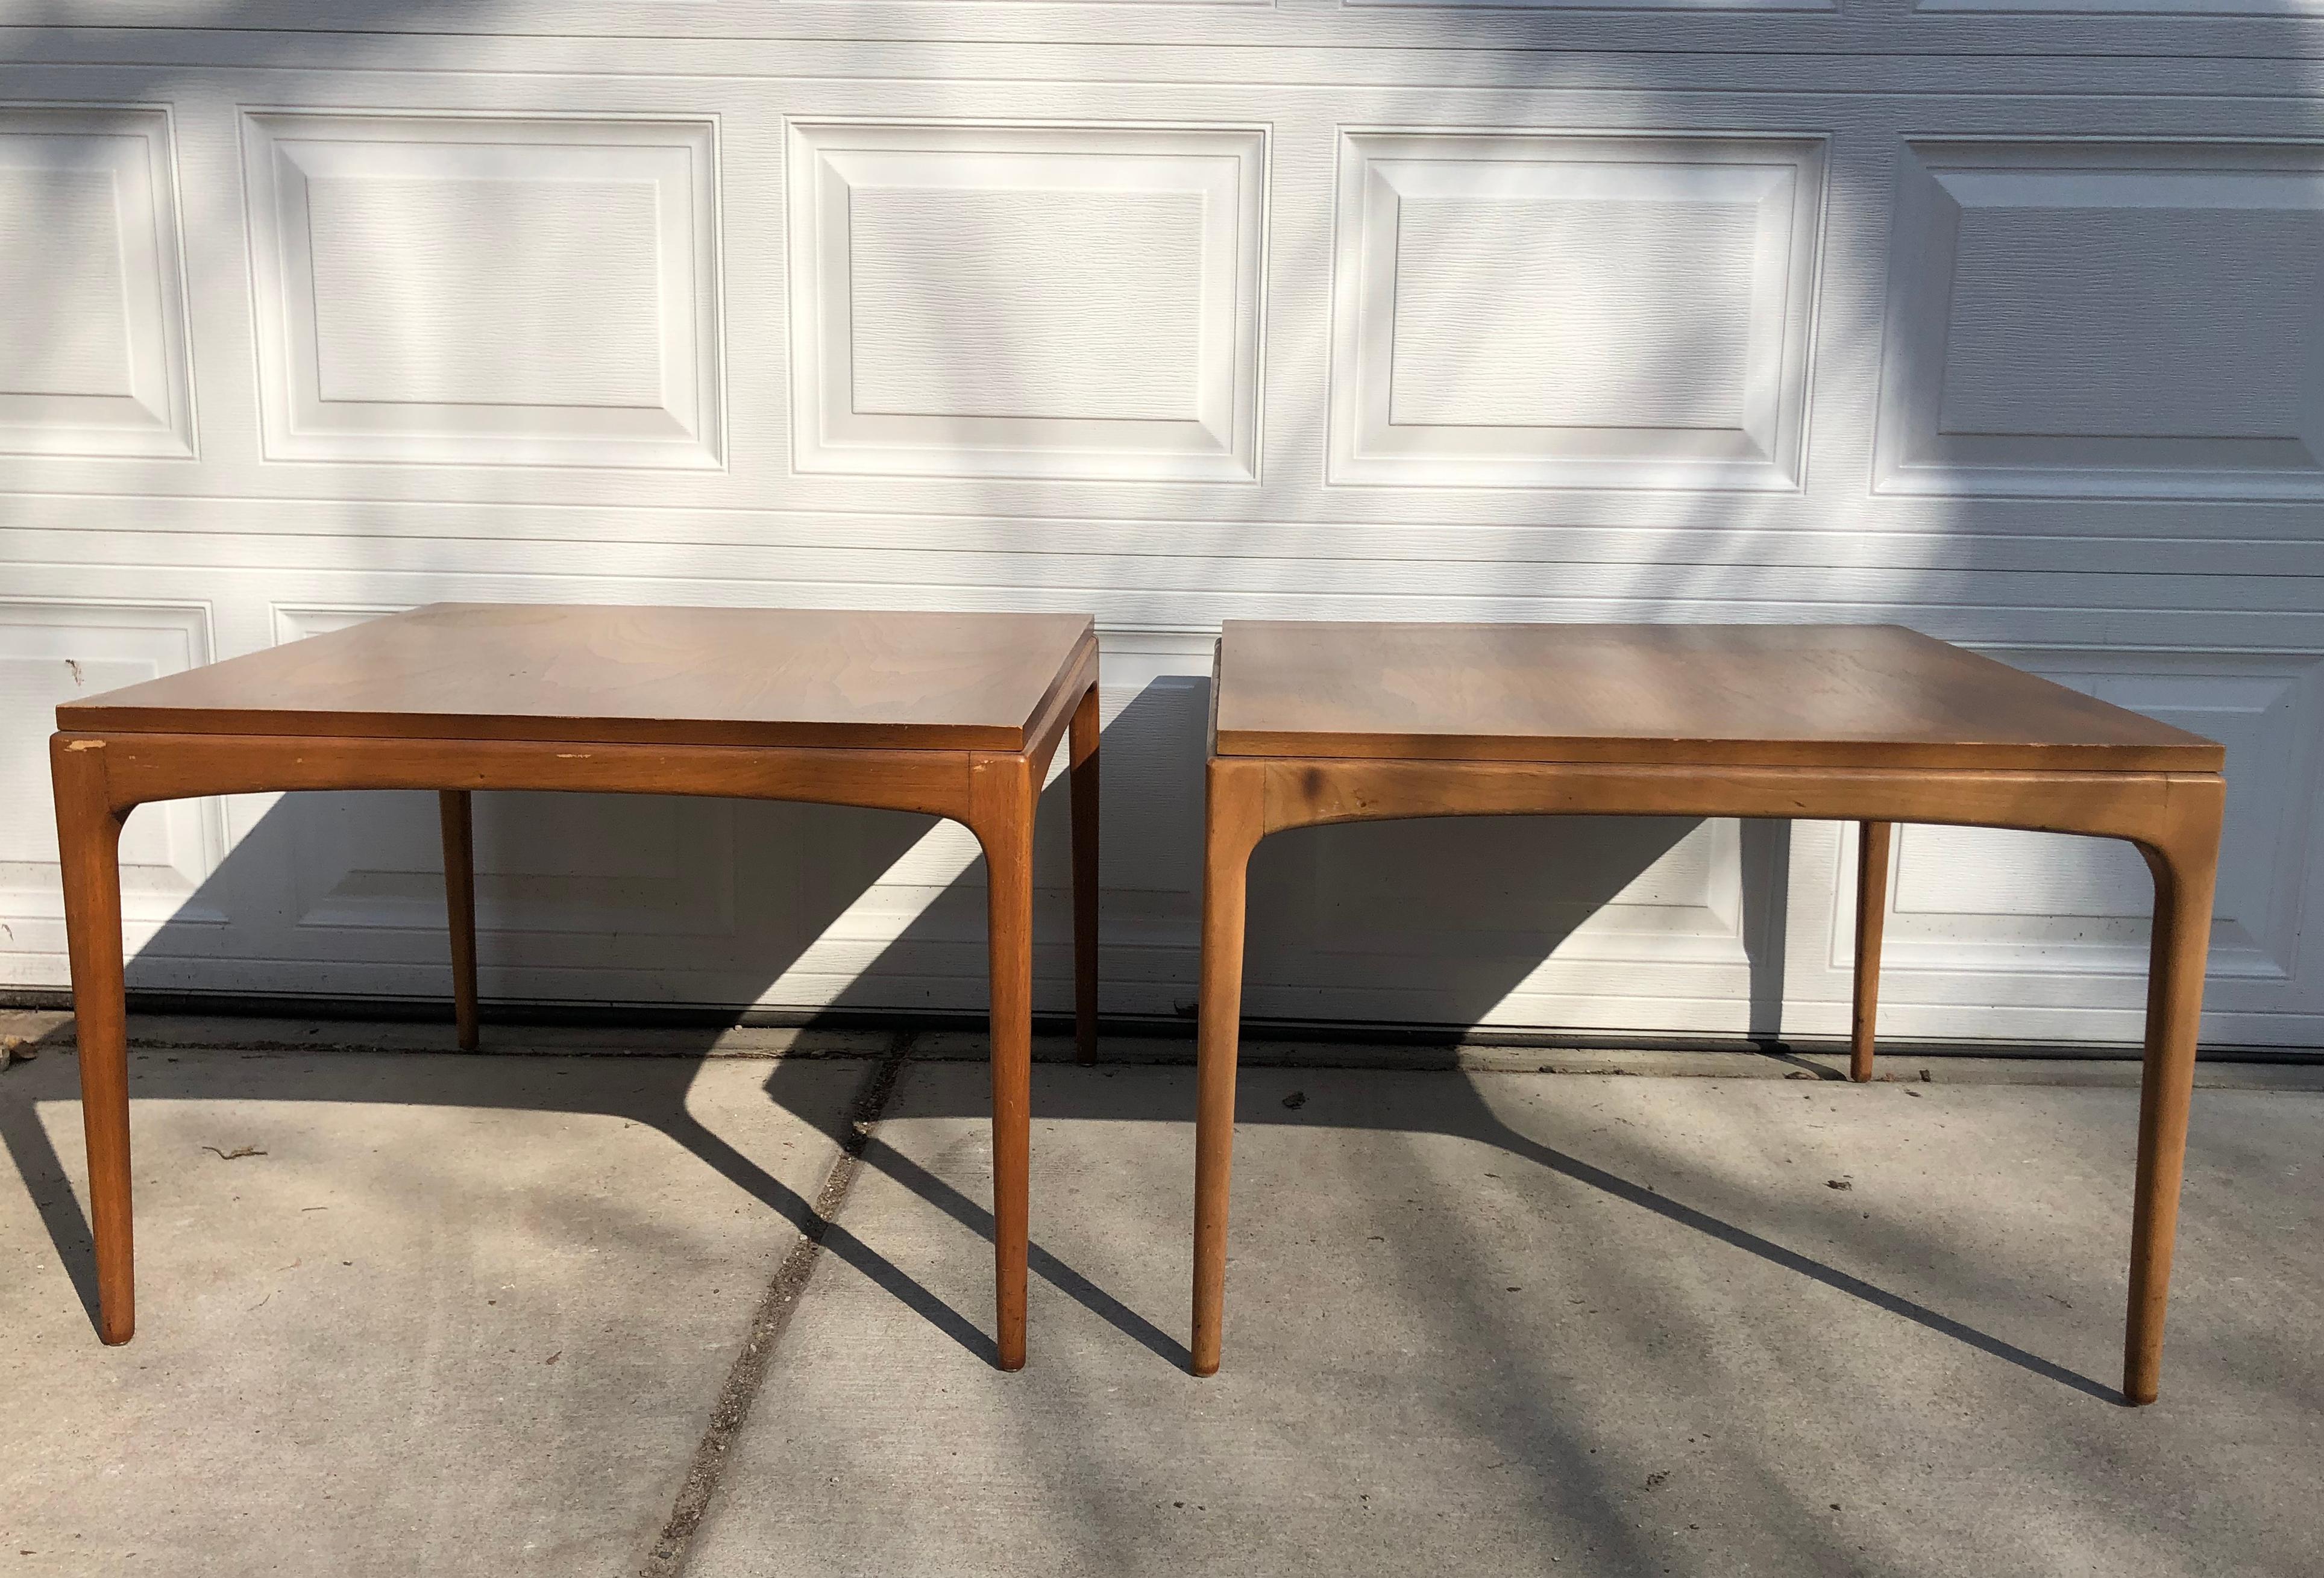 Pair of original condition (not refinished) American walnut side tables by Lane. This Mid-Century Modern coffee table in walnut was made in Altavista, Virginia, from the early 1960s. The top has an inlaid border resting on circular tapering